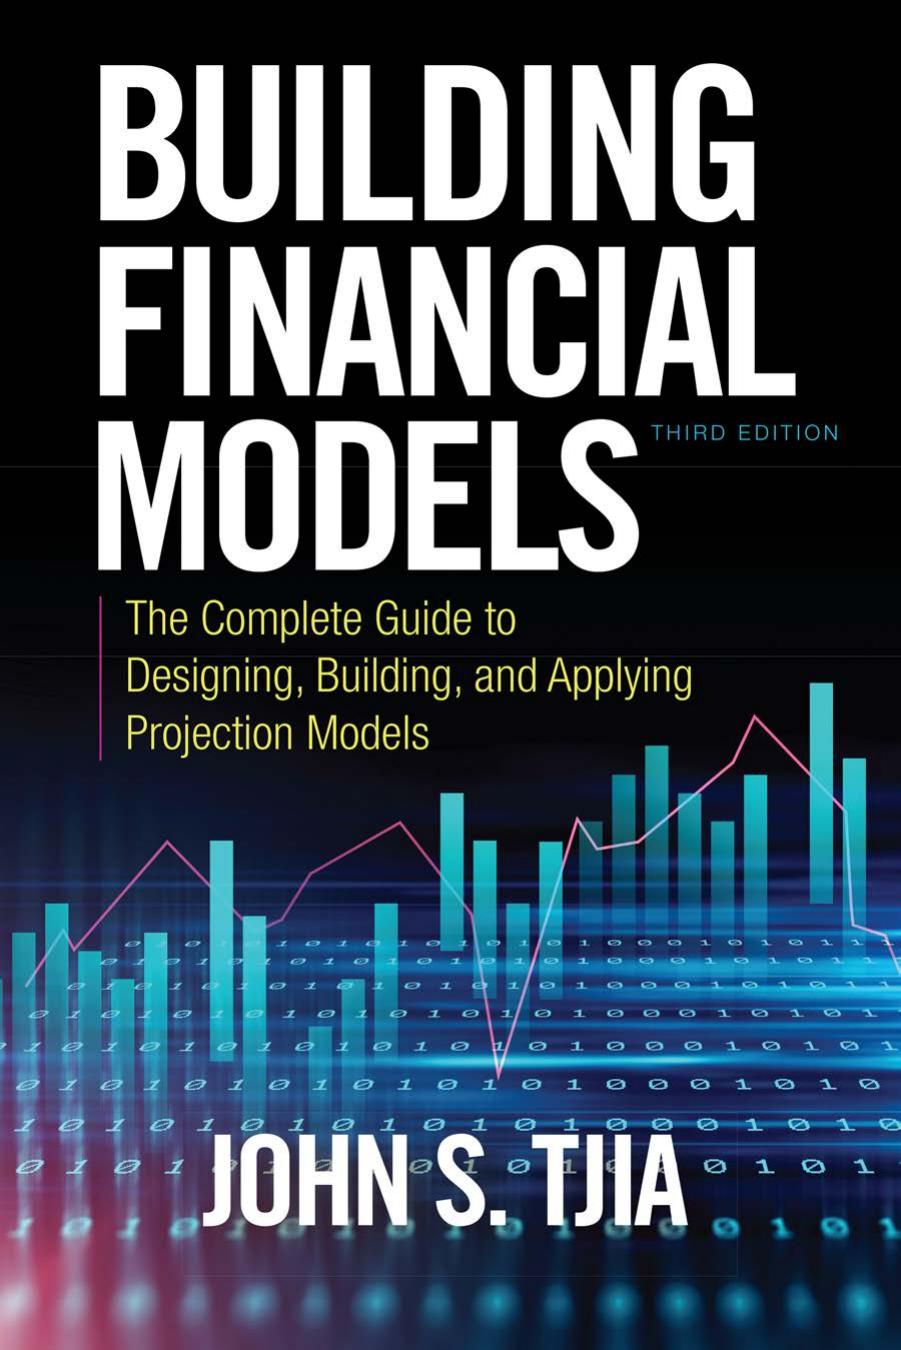 Building Financial Models: The Complete Guide to Designing, Building, and Applying Projection Models, Third Edition by John S. Tjia